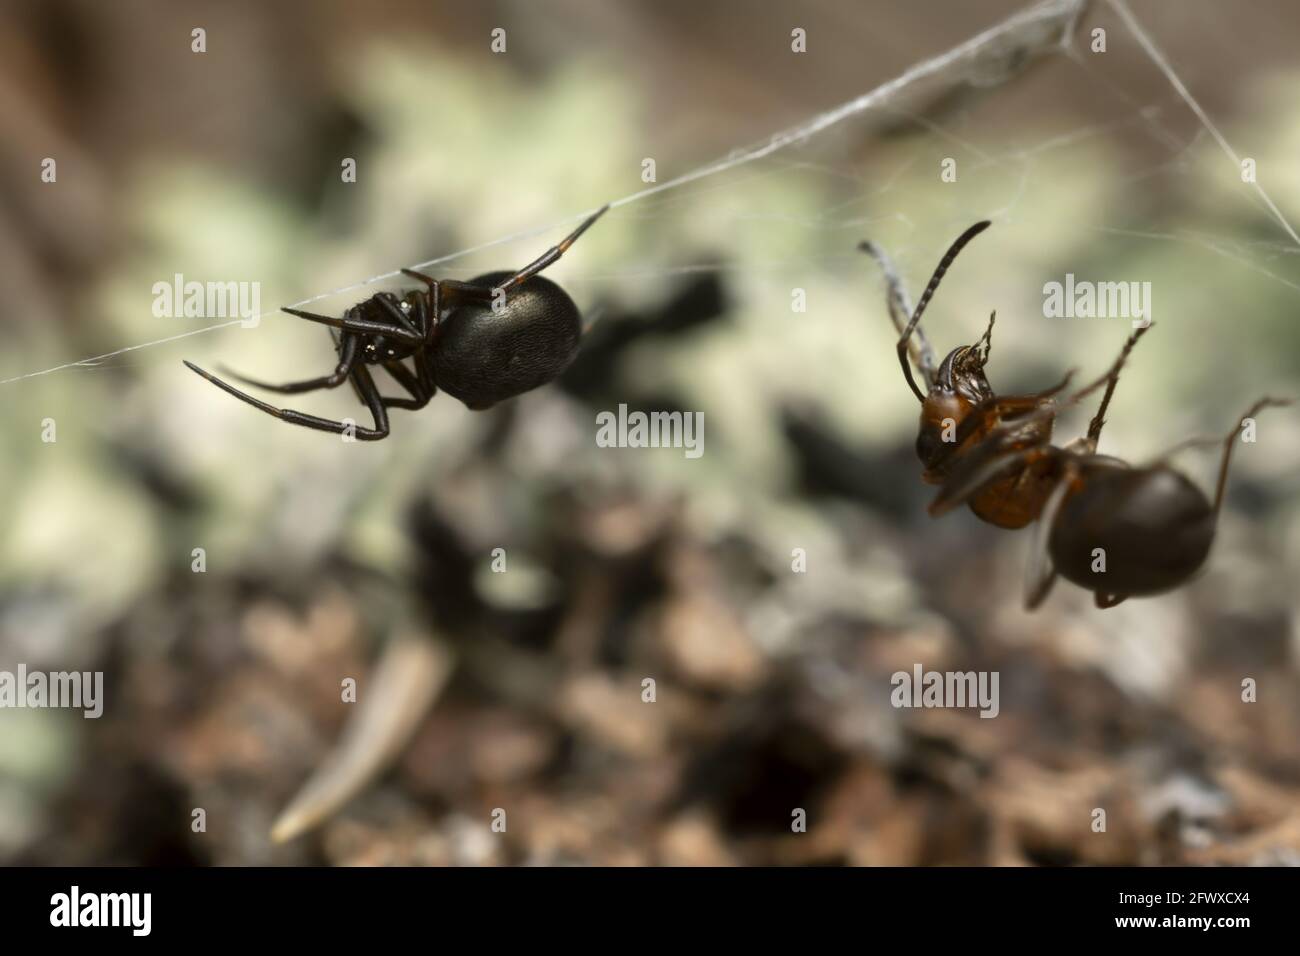 Closeup of a tangle-web spider, Theridiidae with caught wood ant Stock Photo